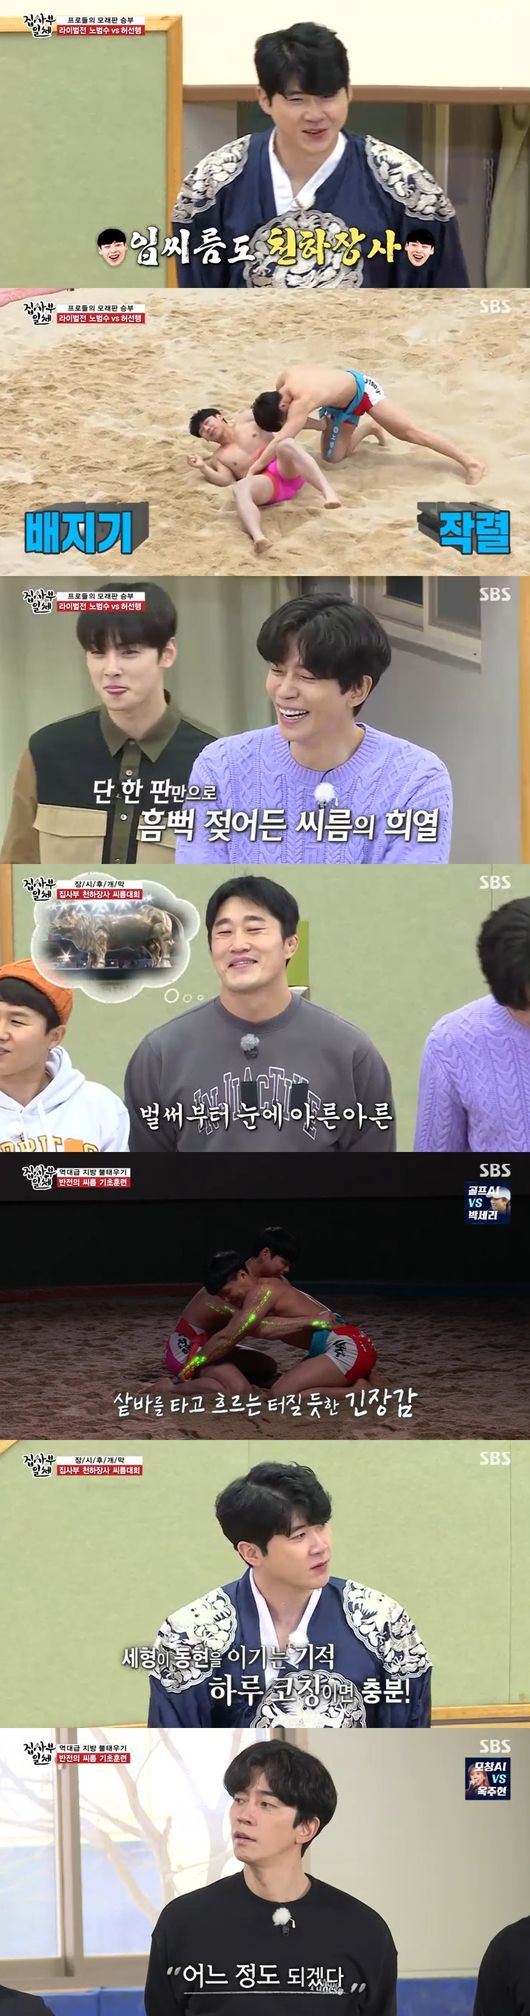 On the 24th, SBS entertainment All The Butlers gathered all the members on the wrestling board.In the 2000s, the youngest Taebaek, Vic-Fezensac heo Seon-haeng, No Bum-soo, Night if, and Lim Tae-hyuk appeared.The F4 players of the wrestling industry introduced each wrestling, and Lim Tae-hyuk said that only the Vic-Fezensac title was 17 times, and Lee Seung-gi said, I heard from Ho Dong-hyung that it is not normal to listen to Vic-Fezensac title 10 times. Lim Tae-hyuk said, I personally did 17 times, I gave a laugh to her.The youngest heo Seon-haeng player said that Kim Dong-Hyun would be handed over with one hand with technology, and Kim Dong-Hyun took a serious stance with UFC pride, but heo Seon-haeng surprised everyone by handing it over to one room with wrestling technology.It was a taste battle that showed the charm of Daeheung and wrestling in all the excitement of technology beyond weight class.Among them, the All The Butlers Boat Vic-Fezensac Ssireum Contest was announced. The heat was getting hotter when it was awarded a gold calf of pure gold.One-on-one coaching began in the pride battle of the Vic-Fezensac title.Night if said, Hatje Cantz Verlag training is more important than the upper body.Especially when I saw the muscle-trained Night if Hatje Cantz Verlag, I said that I would knock down the Night if except Kim Dong-Hyun, and all of them fell the Night if in anticipation.Turns out Kim Dong-Hyun was laughing when he was drawn to wearing Yang Se-hyeongs hat and lifting the Night if secretly.Lim Tae-hyuk will play ace Cha Eun-woo Choices, Night if Shin Sung-rok, No Bum-soo Yang Se-hyeong, Heo Seon-haeng Lee Seung-gi and Kim Dong-Hyun will play for themselves.Each of them had a one-on-one special training program and a full-fledged wrestling table. Not only the players but also the masters were proud.Lee Seung-gi and Yang Se-hyeong Battle first, Lee Seung-gi succeeded in field bridge technology and passed Yang Se-hyeong.Next up was Cha Eun-woo and Shin Sung-rok, who dominated the advantageous highlands in battle with Battle and Shin Sung-rok.The two men, who were in the game, showed a tight struggle and Cha Eun-woo turned the game over with a last-minute reversal.Lee Seung-gi was in the final with a minor victory, and Cha Eun-woo was battle with Kim Dong-Hyun.Kim Dong-Hyun was ahead of the turn with power, with Cha Eun-woo, who was reborn as a wrestling genius, paying attention to whether Kim Dong-Hyun could win.Lee Seung-gi and Kim Dong-Hyun played the final Battle, and Lee Seung-gi showed confidence in the field legs.So, Lee Seung-gi promised to make a field bridge technology and turned into a field bridge bot, but Kim Dong-Hyun won one victory by blocking it with power.Lee Seung-gi tried again the field bridge, and won one win each in one room, while starting the second game with a spleen figure.Only the last three games were left, and it was noted that Lee Seung-gi would play a reversal with a field bridge.In a fierce game, Kim Dong-Hyun took a moments eyeball, Lee Seung-gi put on the last field bridge technique, and Kim Dong-Hyun won the game.This made the All The Butlers ship Vic-Fezensac Kim Dong-Hyun.It was a time to once again check the power of World 6th-ranked UFC player Kim Dong-Hyun.Kim Dong-Hyun, who received the prize money from the gold calf, shouted Fathers Vic-Fezensac to his daughter and gave her a warm heart.[Photo] Capture All The Butlers Broadcast Screen